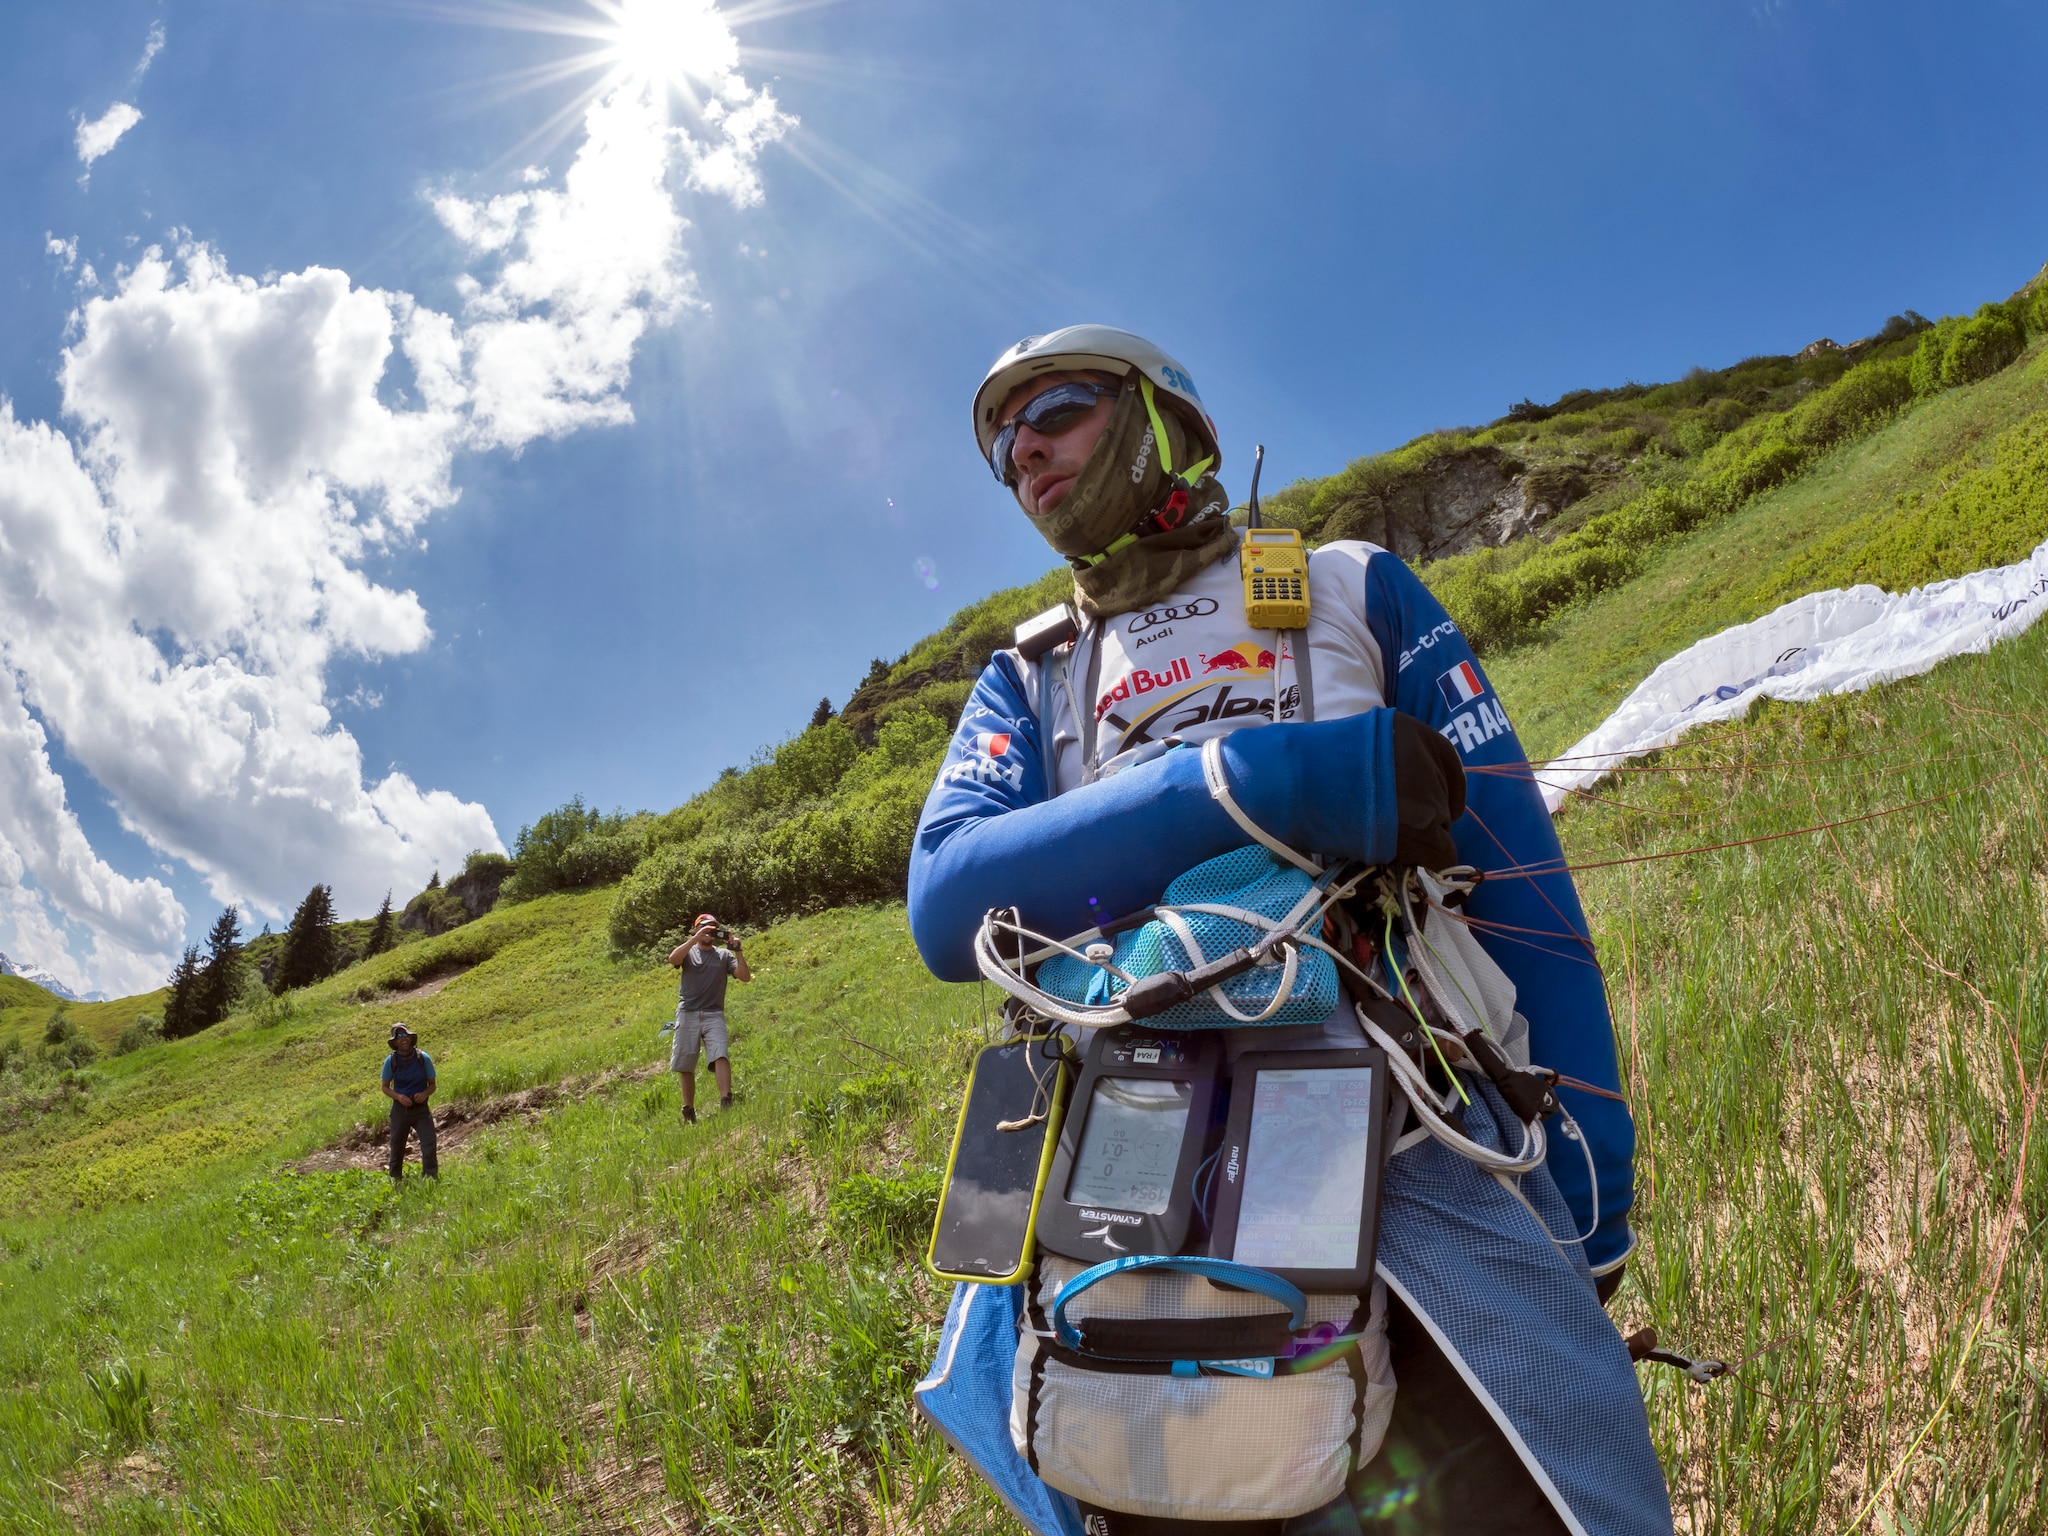 Maxime Pinot (FRA4) seen during the Red Bull X-Alps in Davos, Switzerland on June 19, 2019